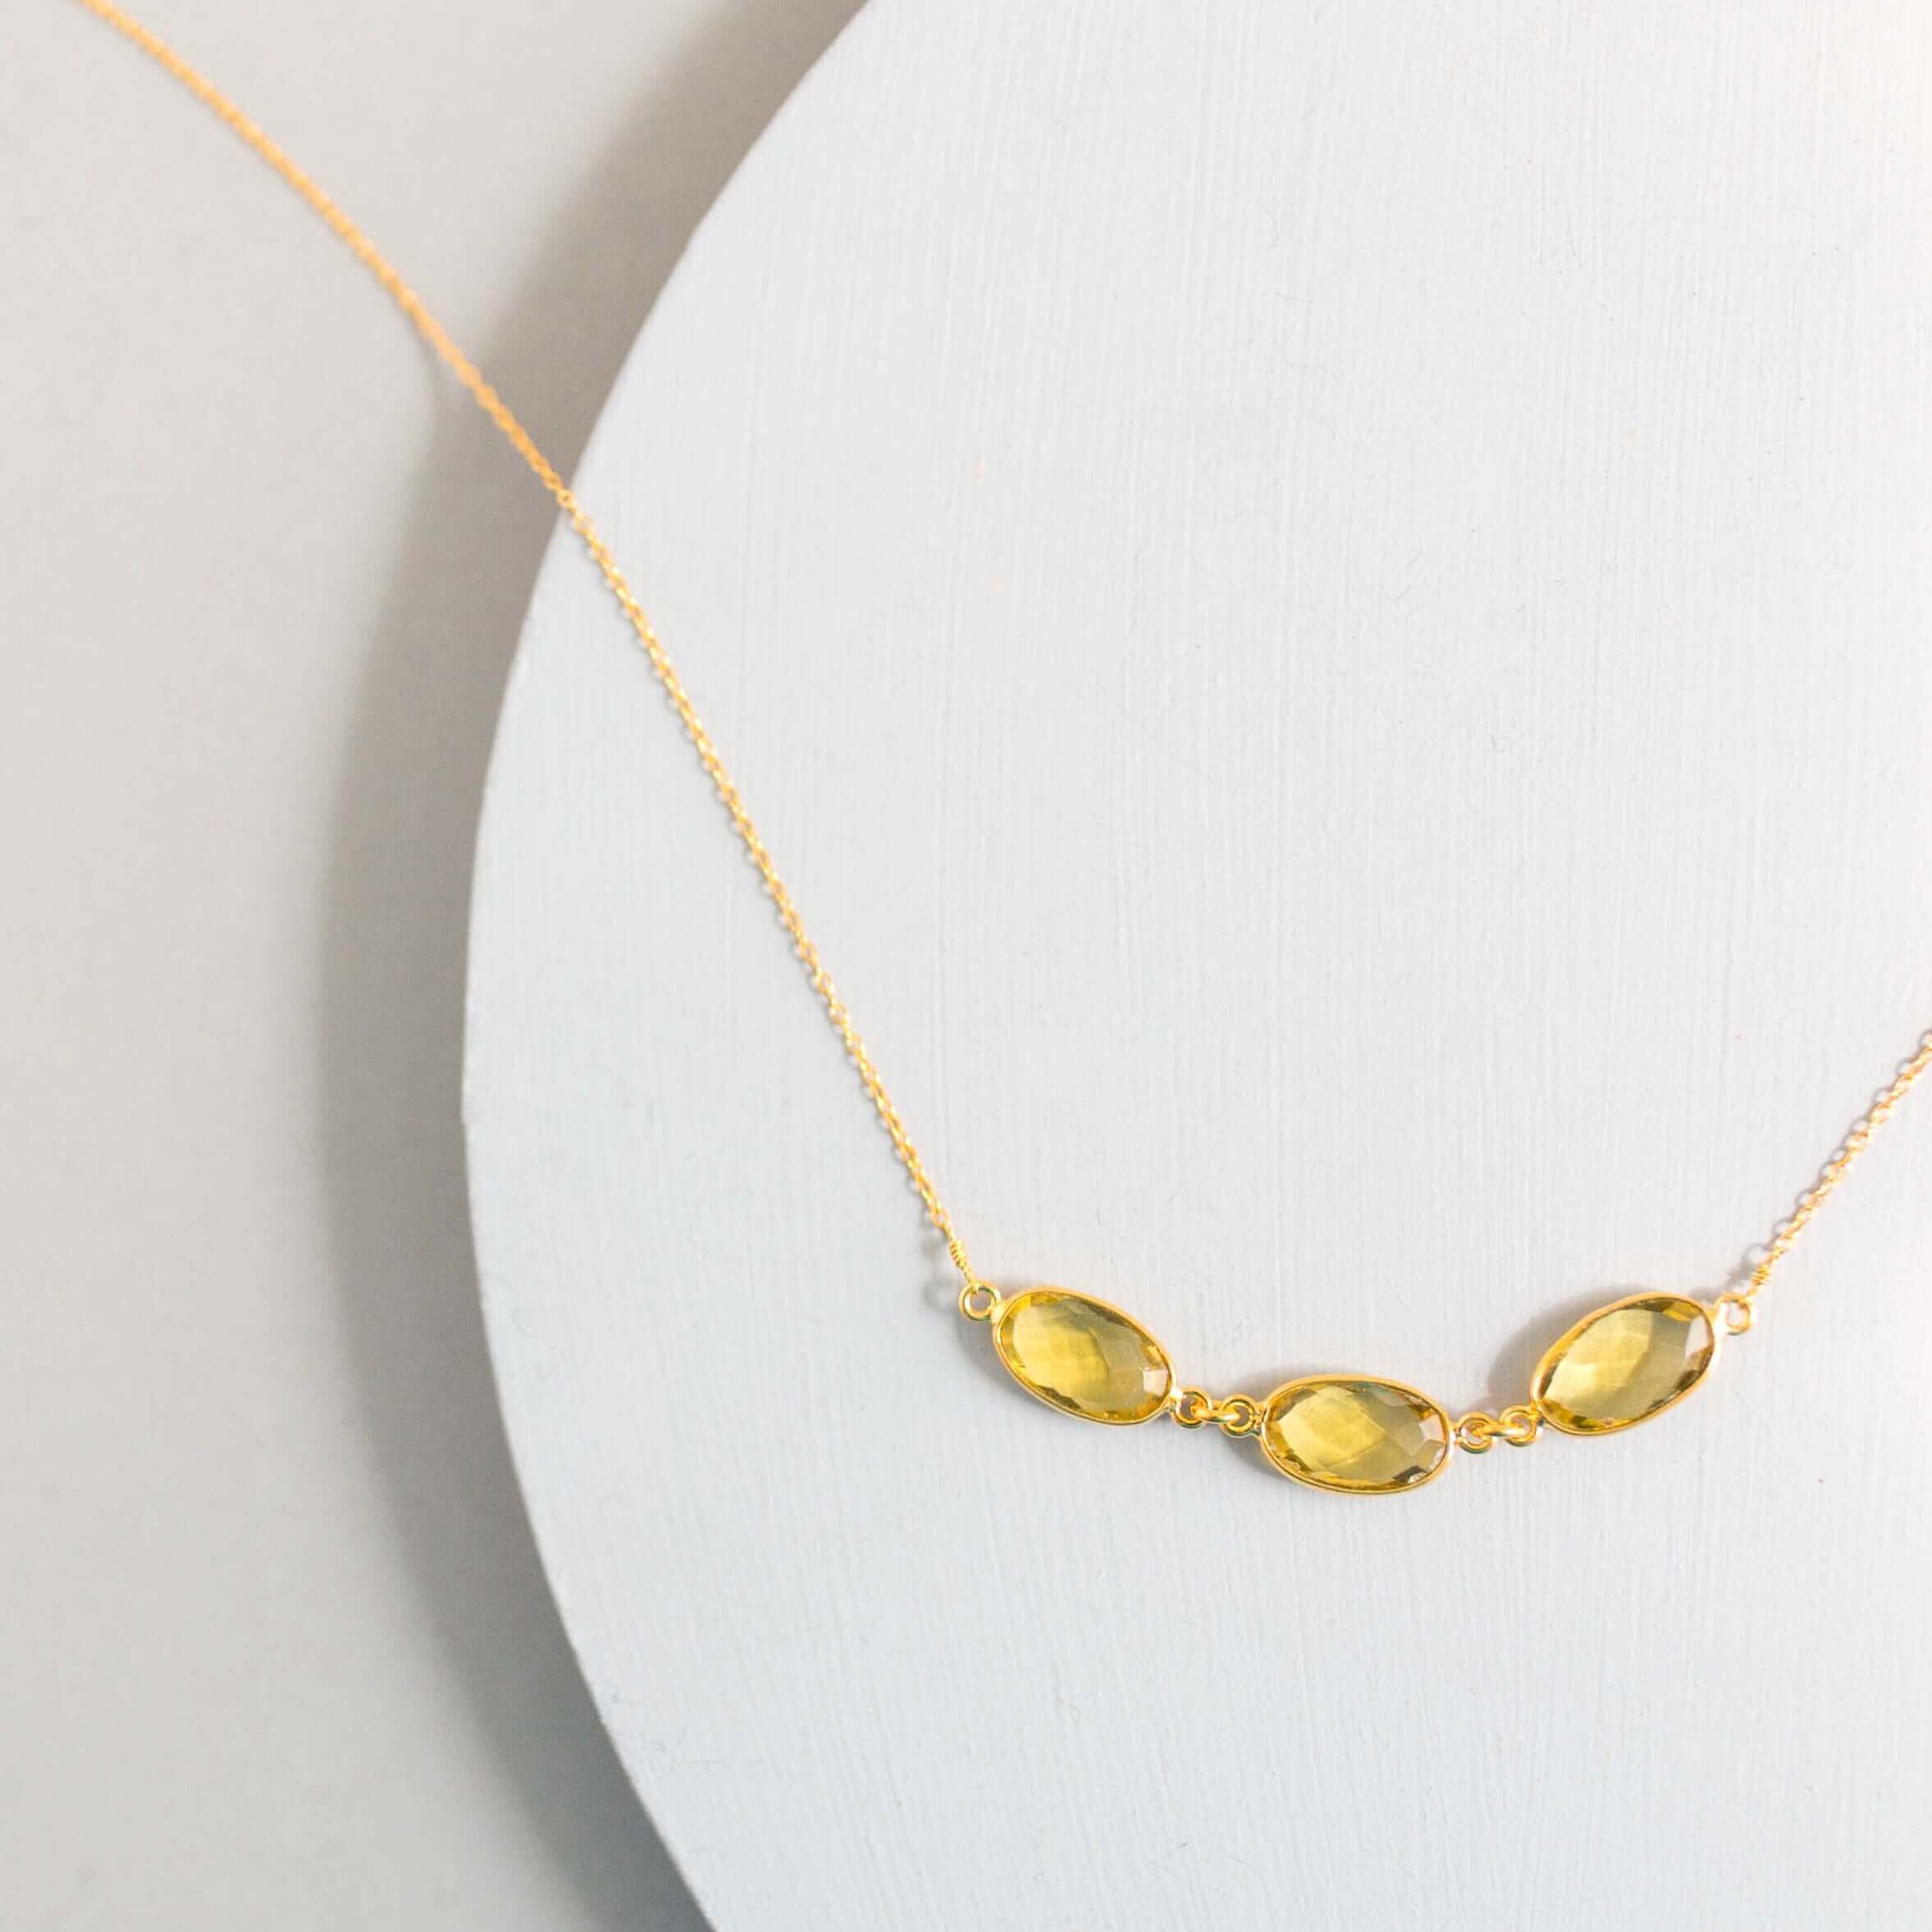 16-18" Gold Plated Necklace with Three Citrine Gemstones